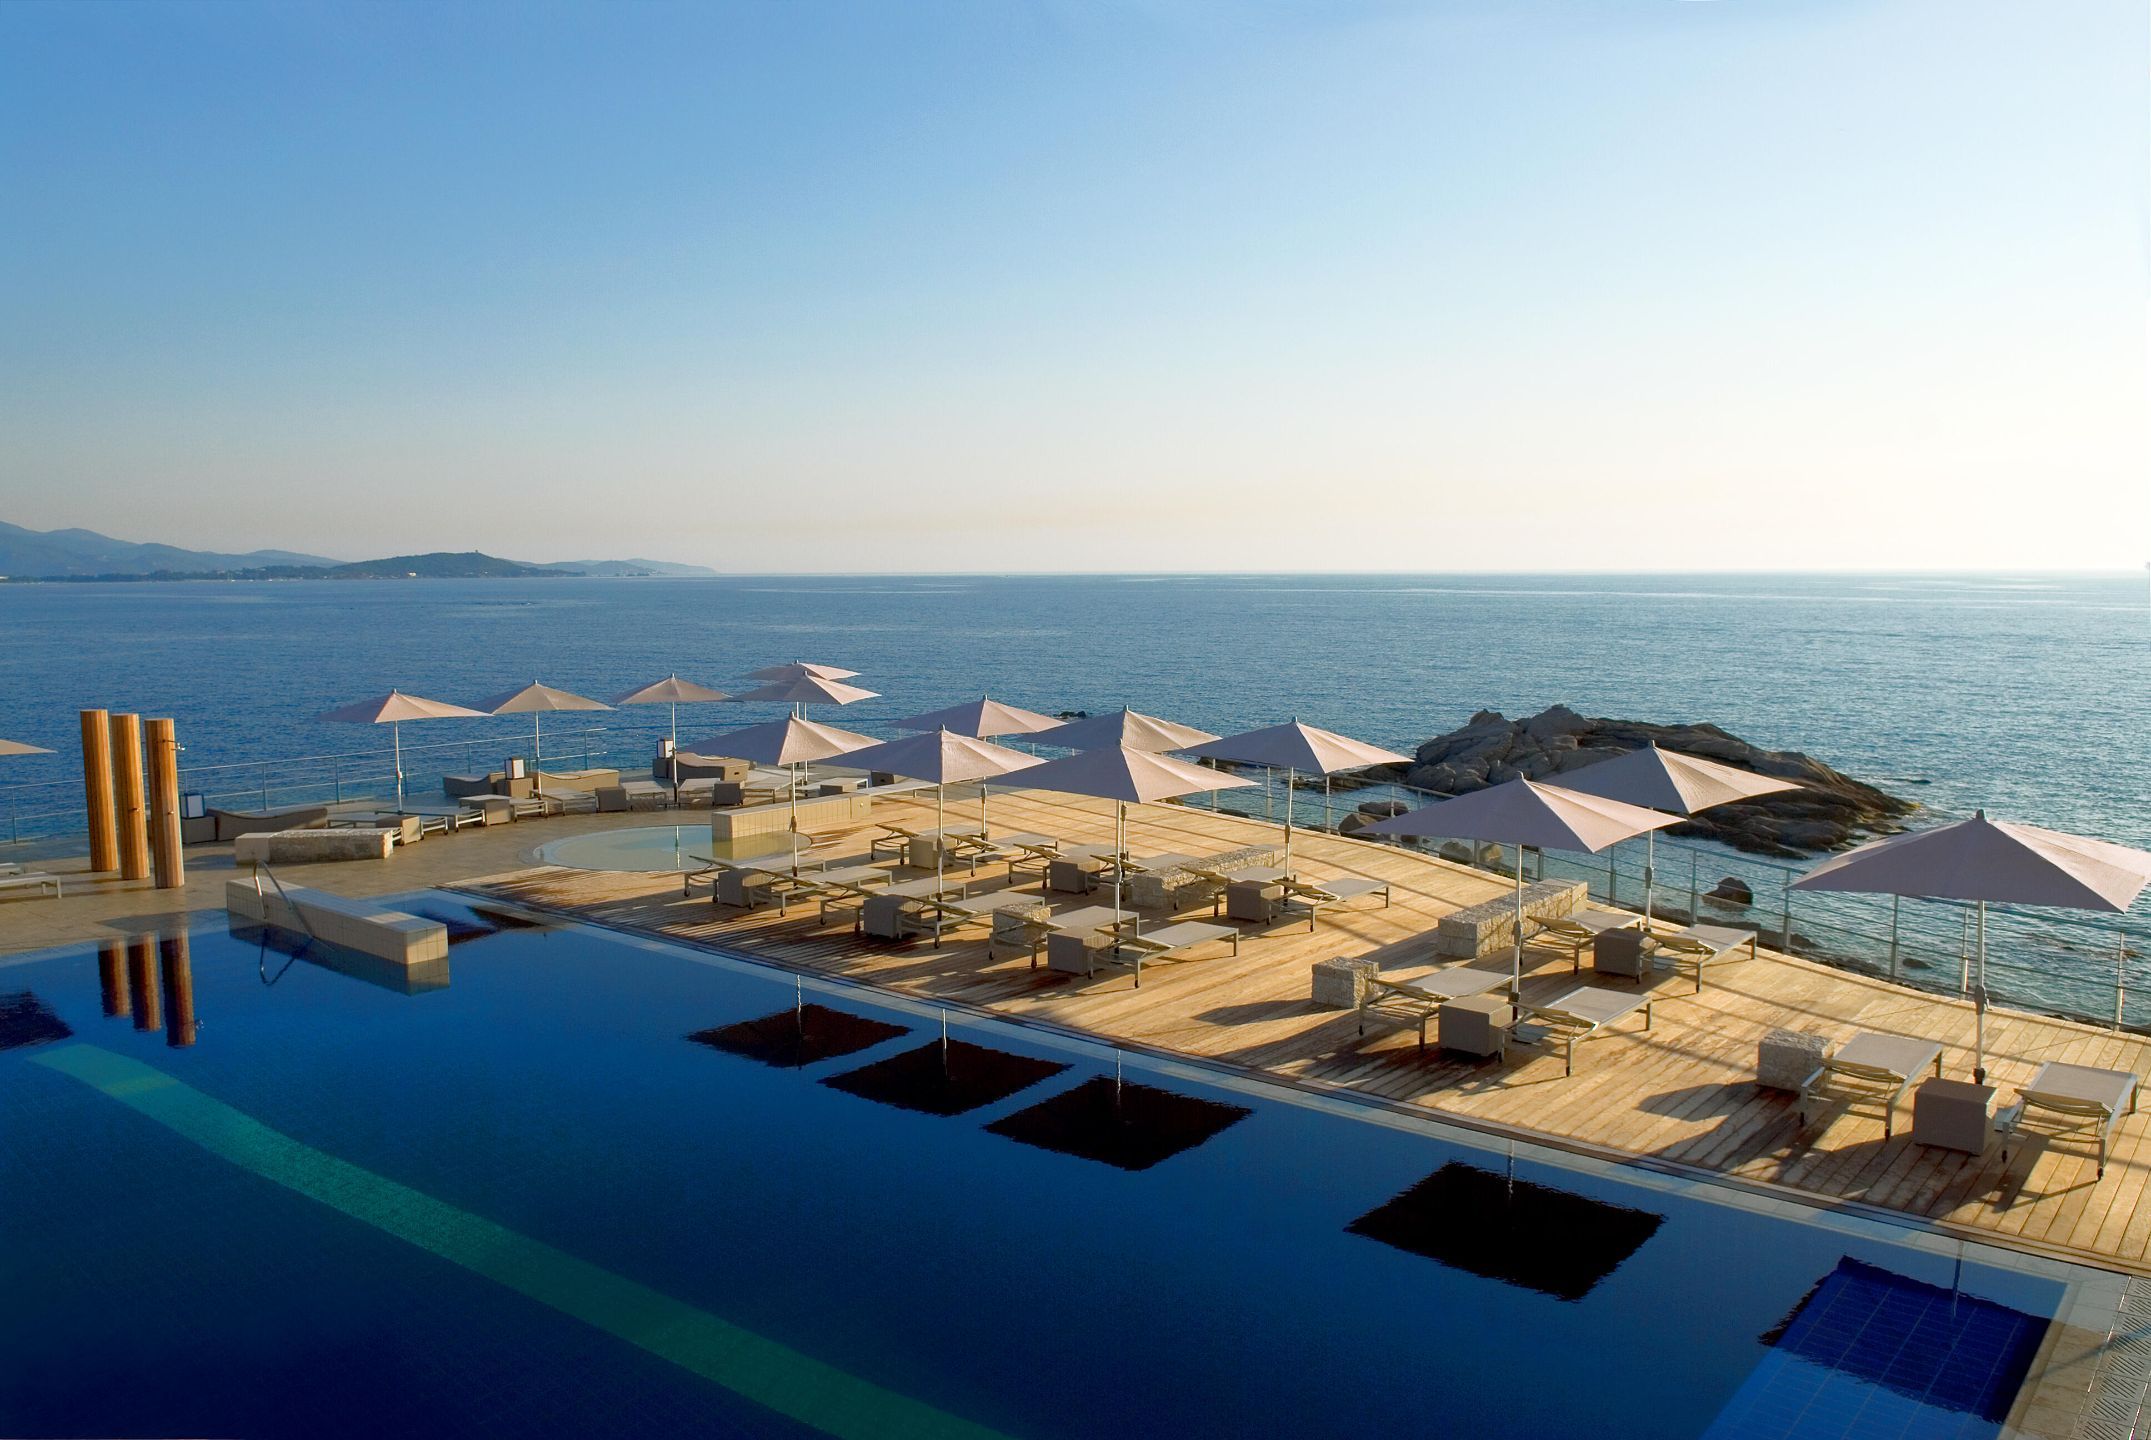 Hotels | CORSICA LUXURY EXPERIENCE - Corse